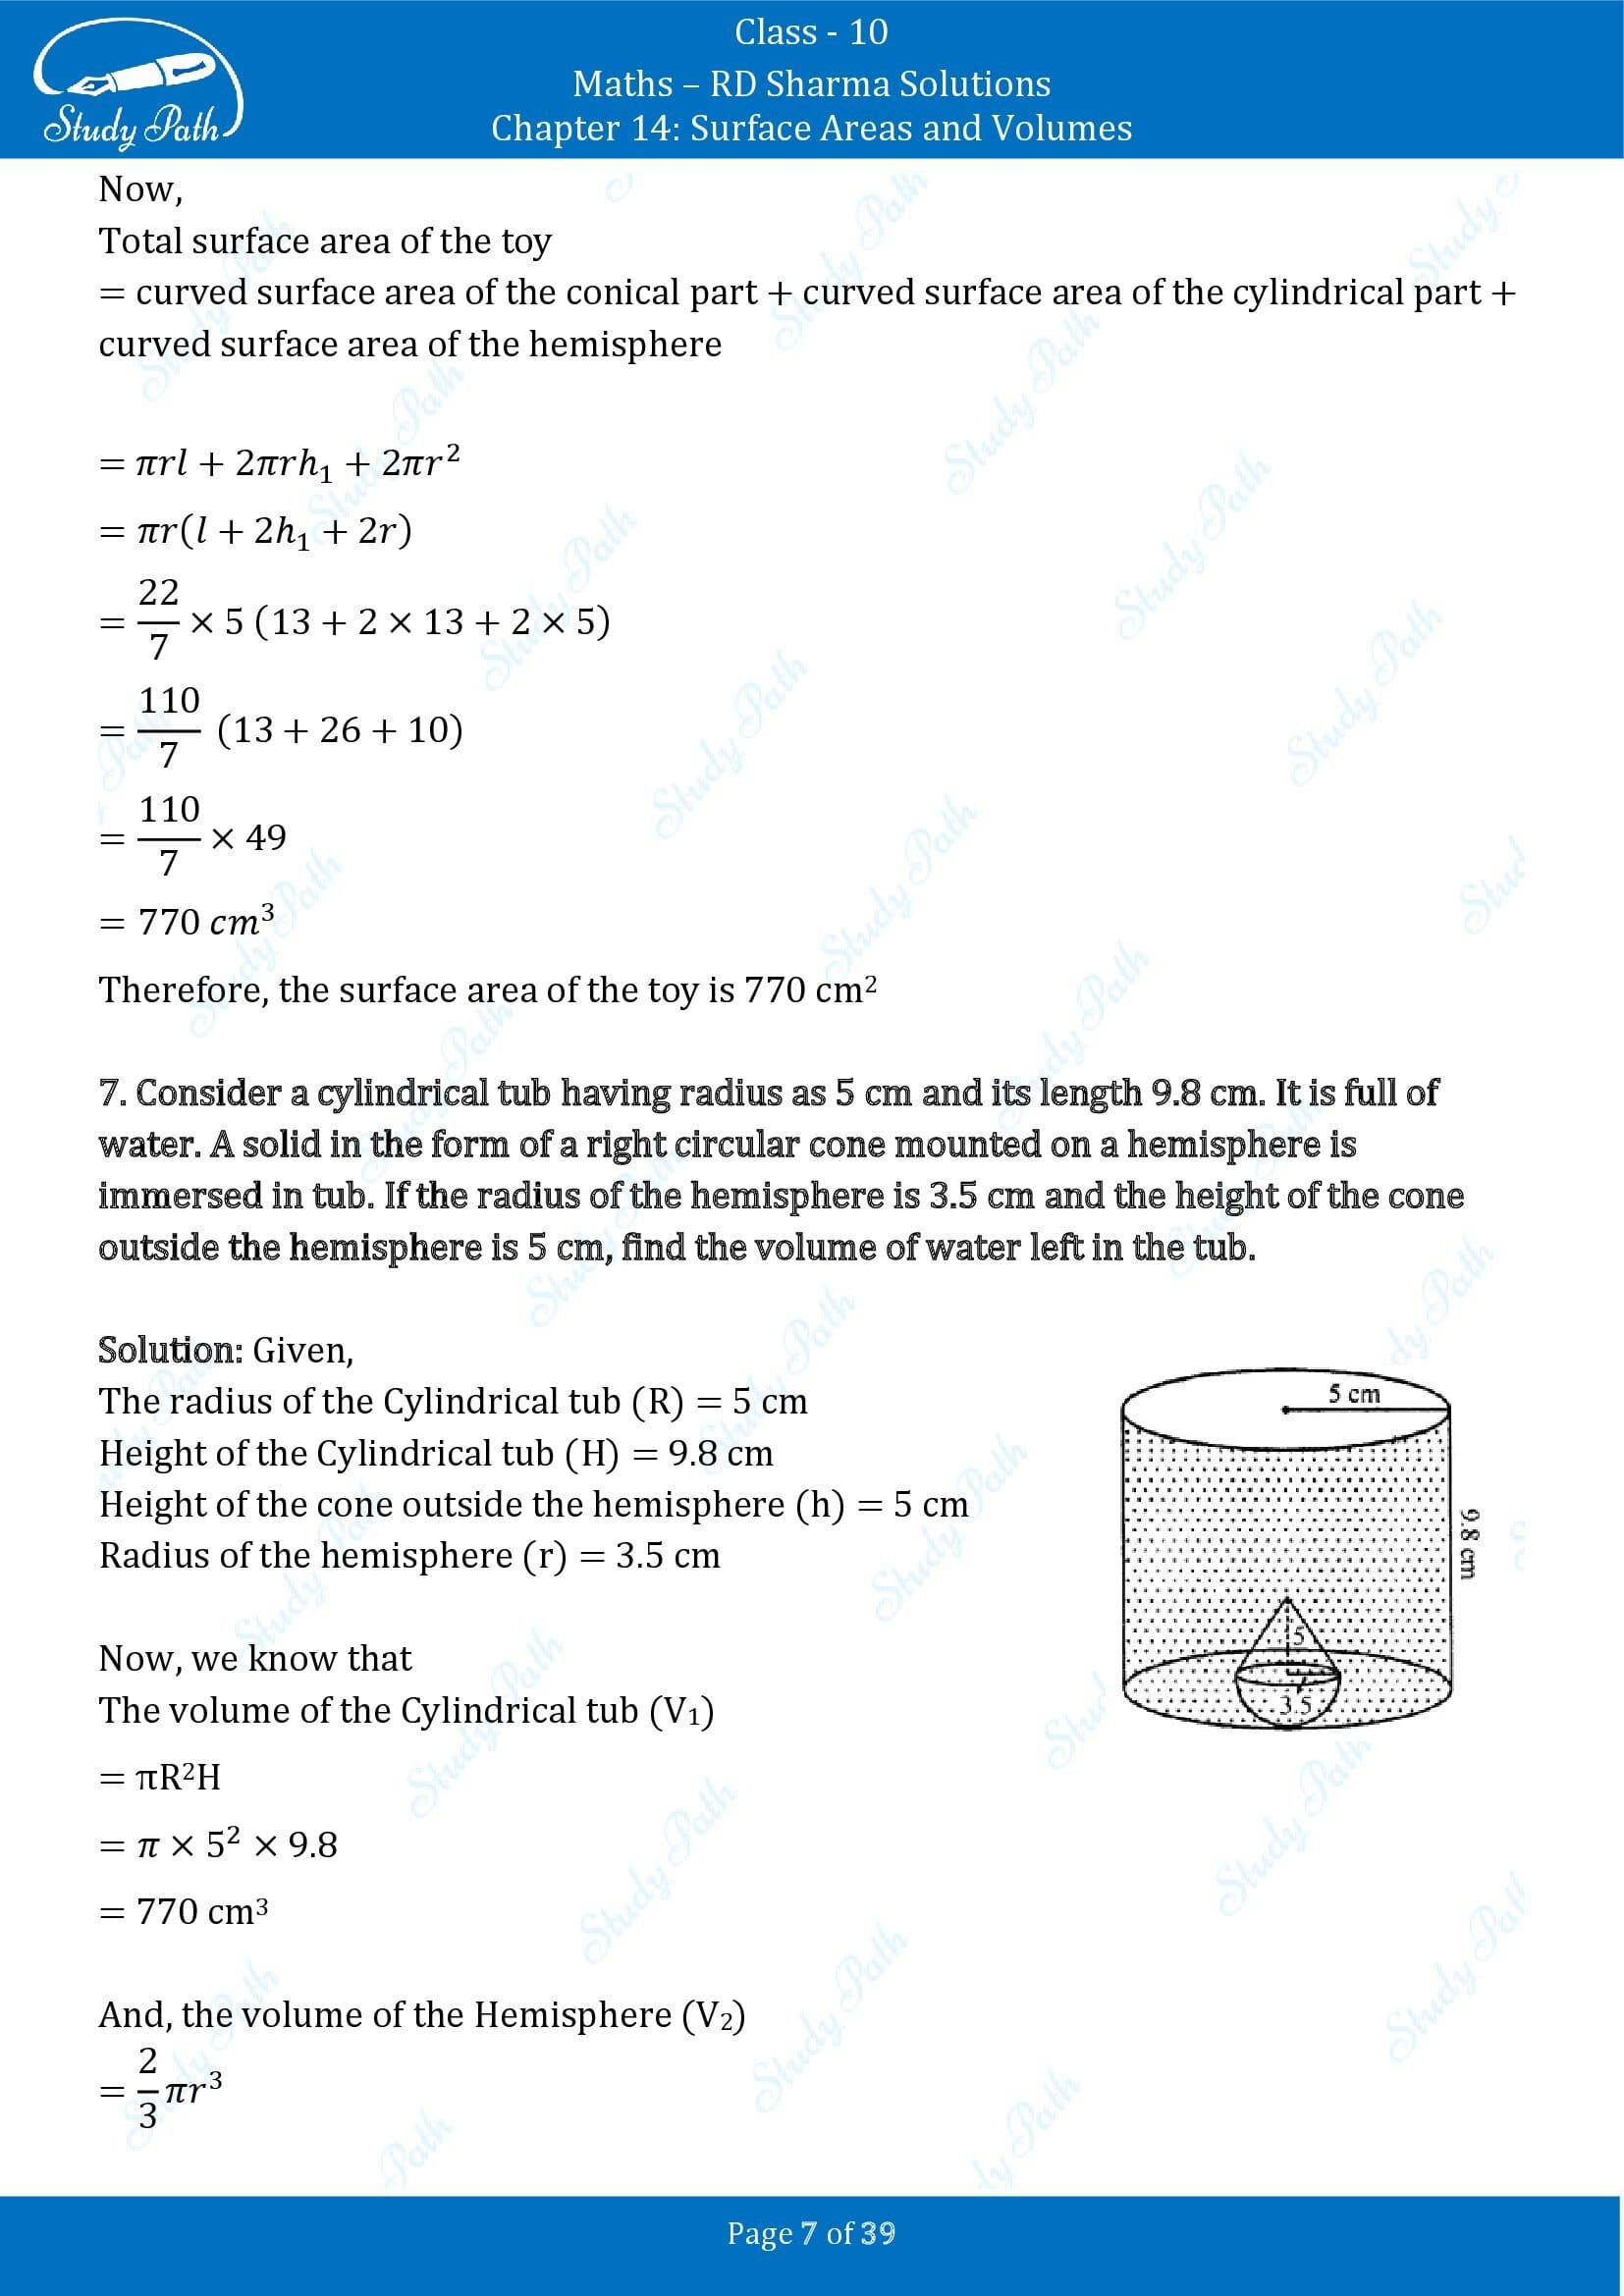 RD Sharma Solutions Class 10 Chapter 14 Surface Areas and Volumes Exercise 14.2 00007